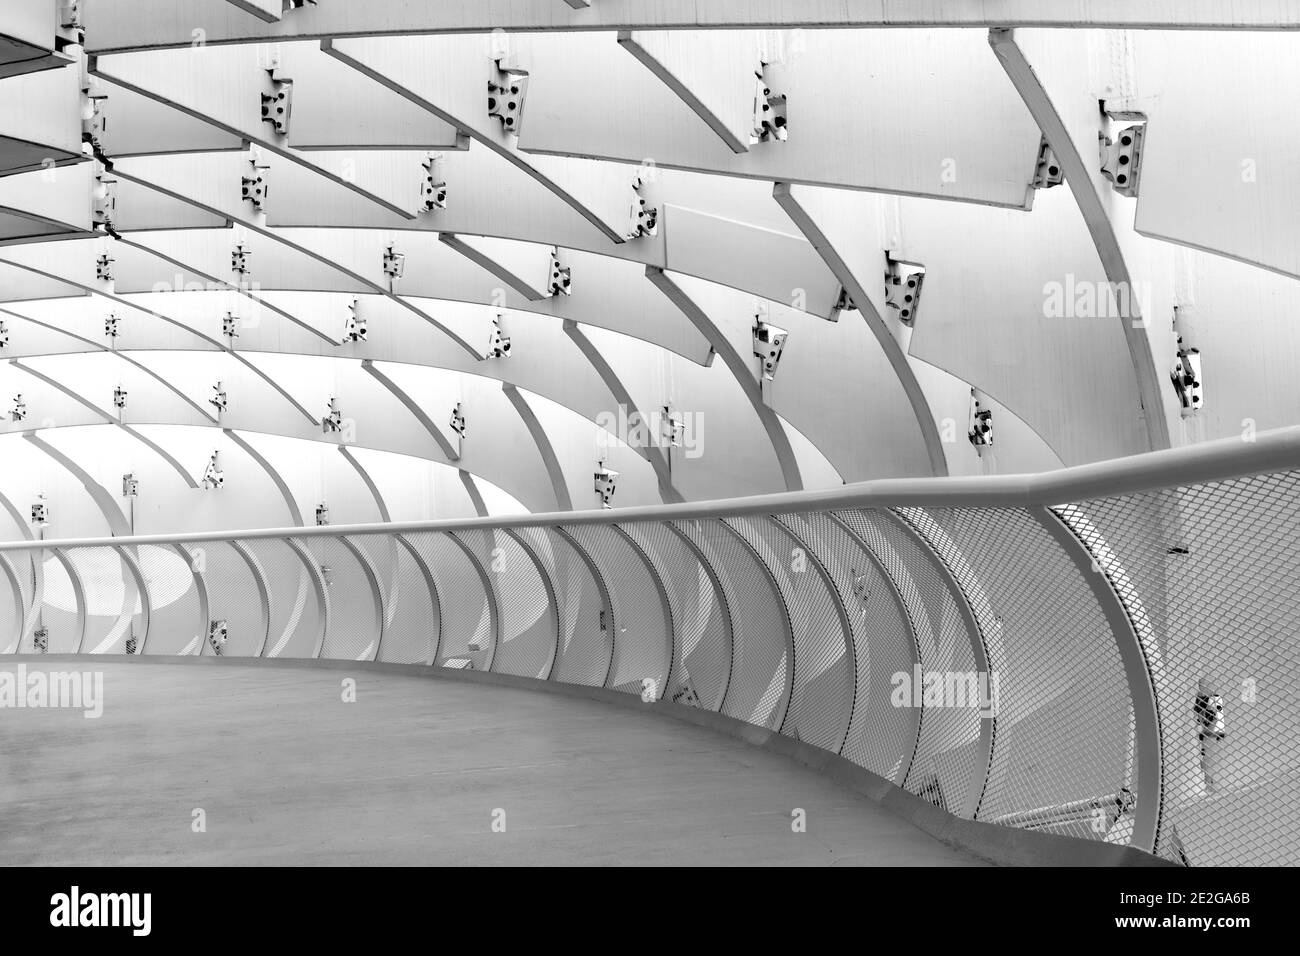 Seville, Spain - 10 January, 2021: detail view of the corridors and curved wooden structure of the Metropol Parasol in Seville Stock Photo